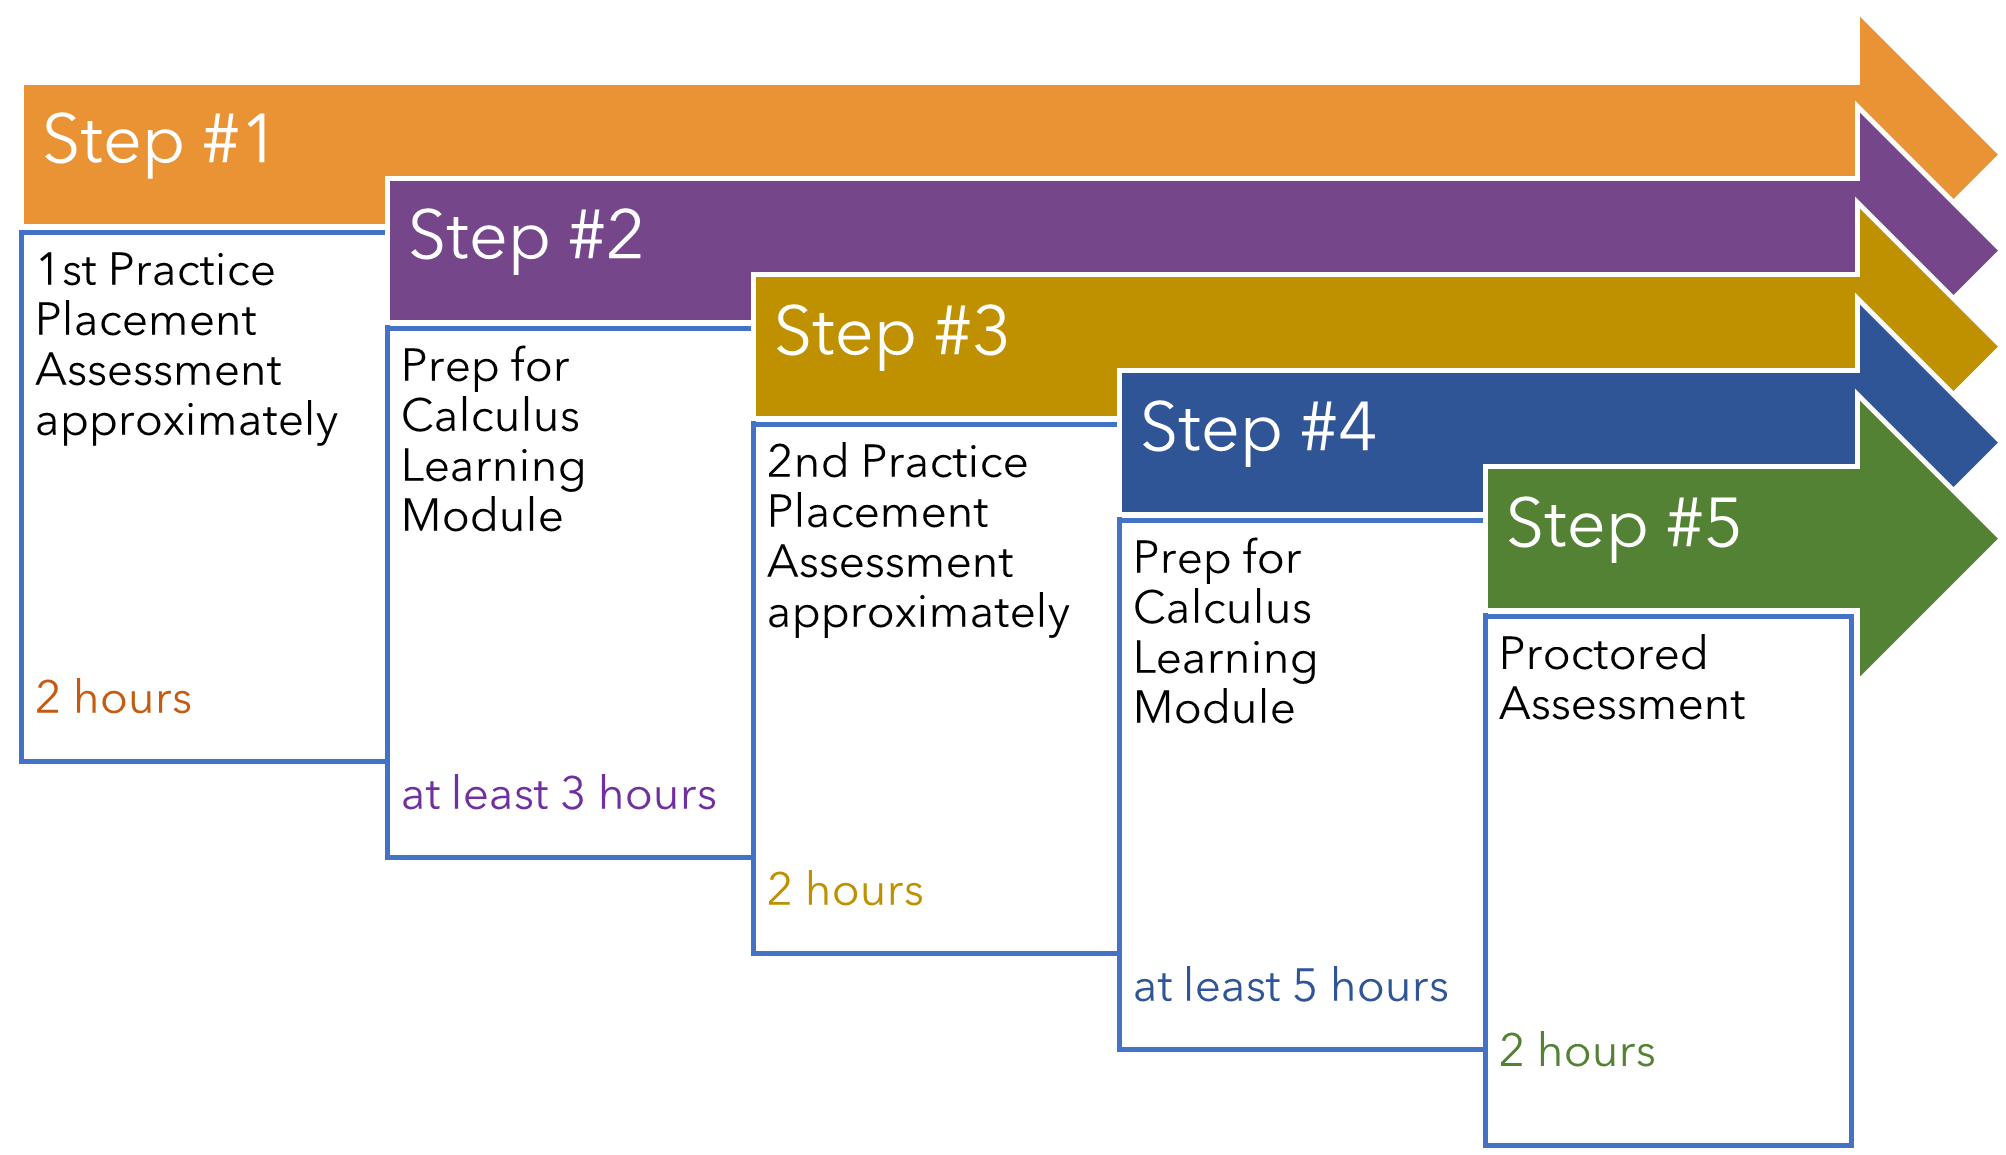 Timeline of Calculus Placement Process with five steps - Step 1: 1st Practice Assessment approximately 2 hours, Step 2: Prep for Calculus Learning Module at least 3 hours, Step 3: 2nd Practice Placement Assessment approximately 2 hours, Step 4: Prep for Calculus Learning Module at least 5 hours, and Step 5: Proctored Assessment 2 hours